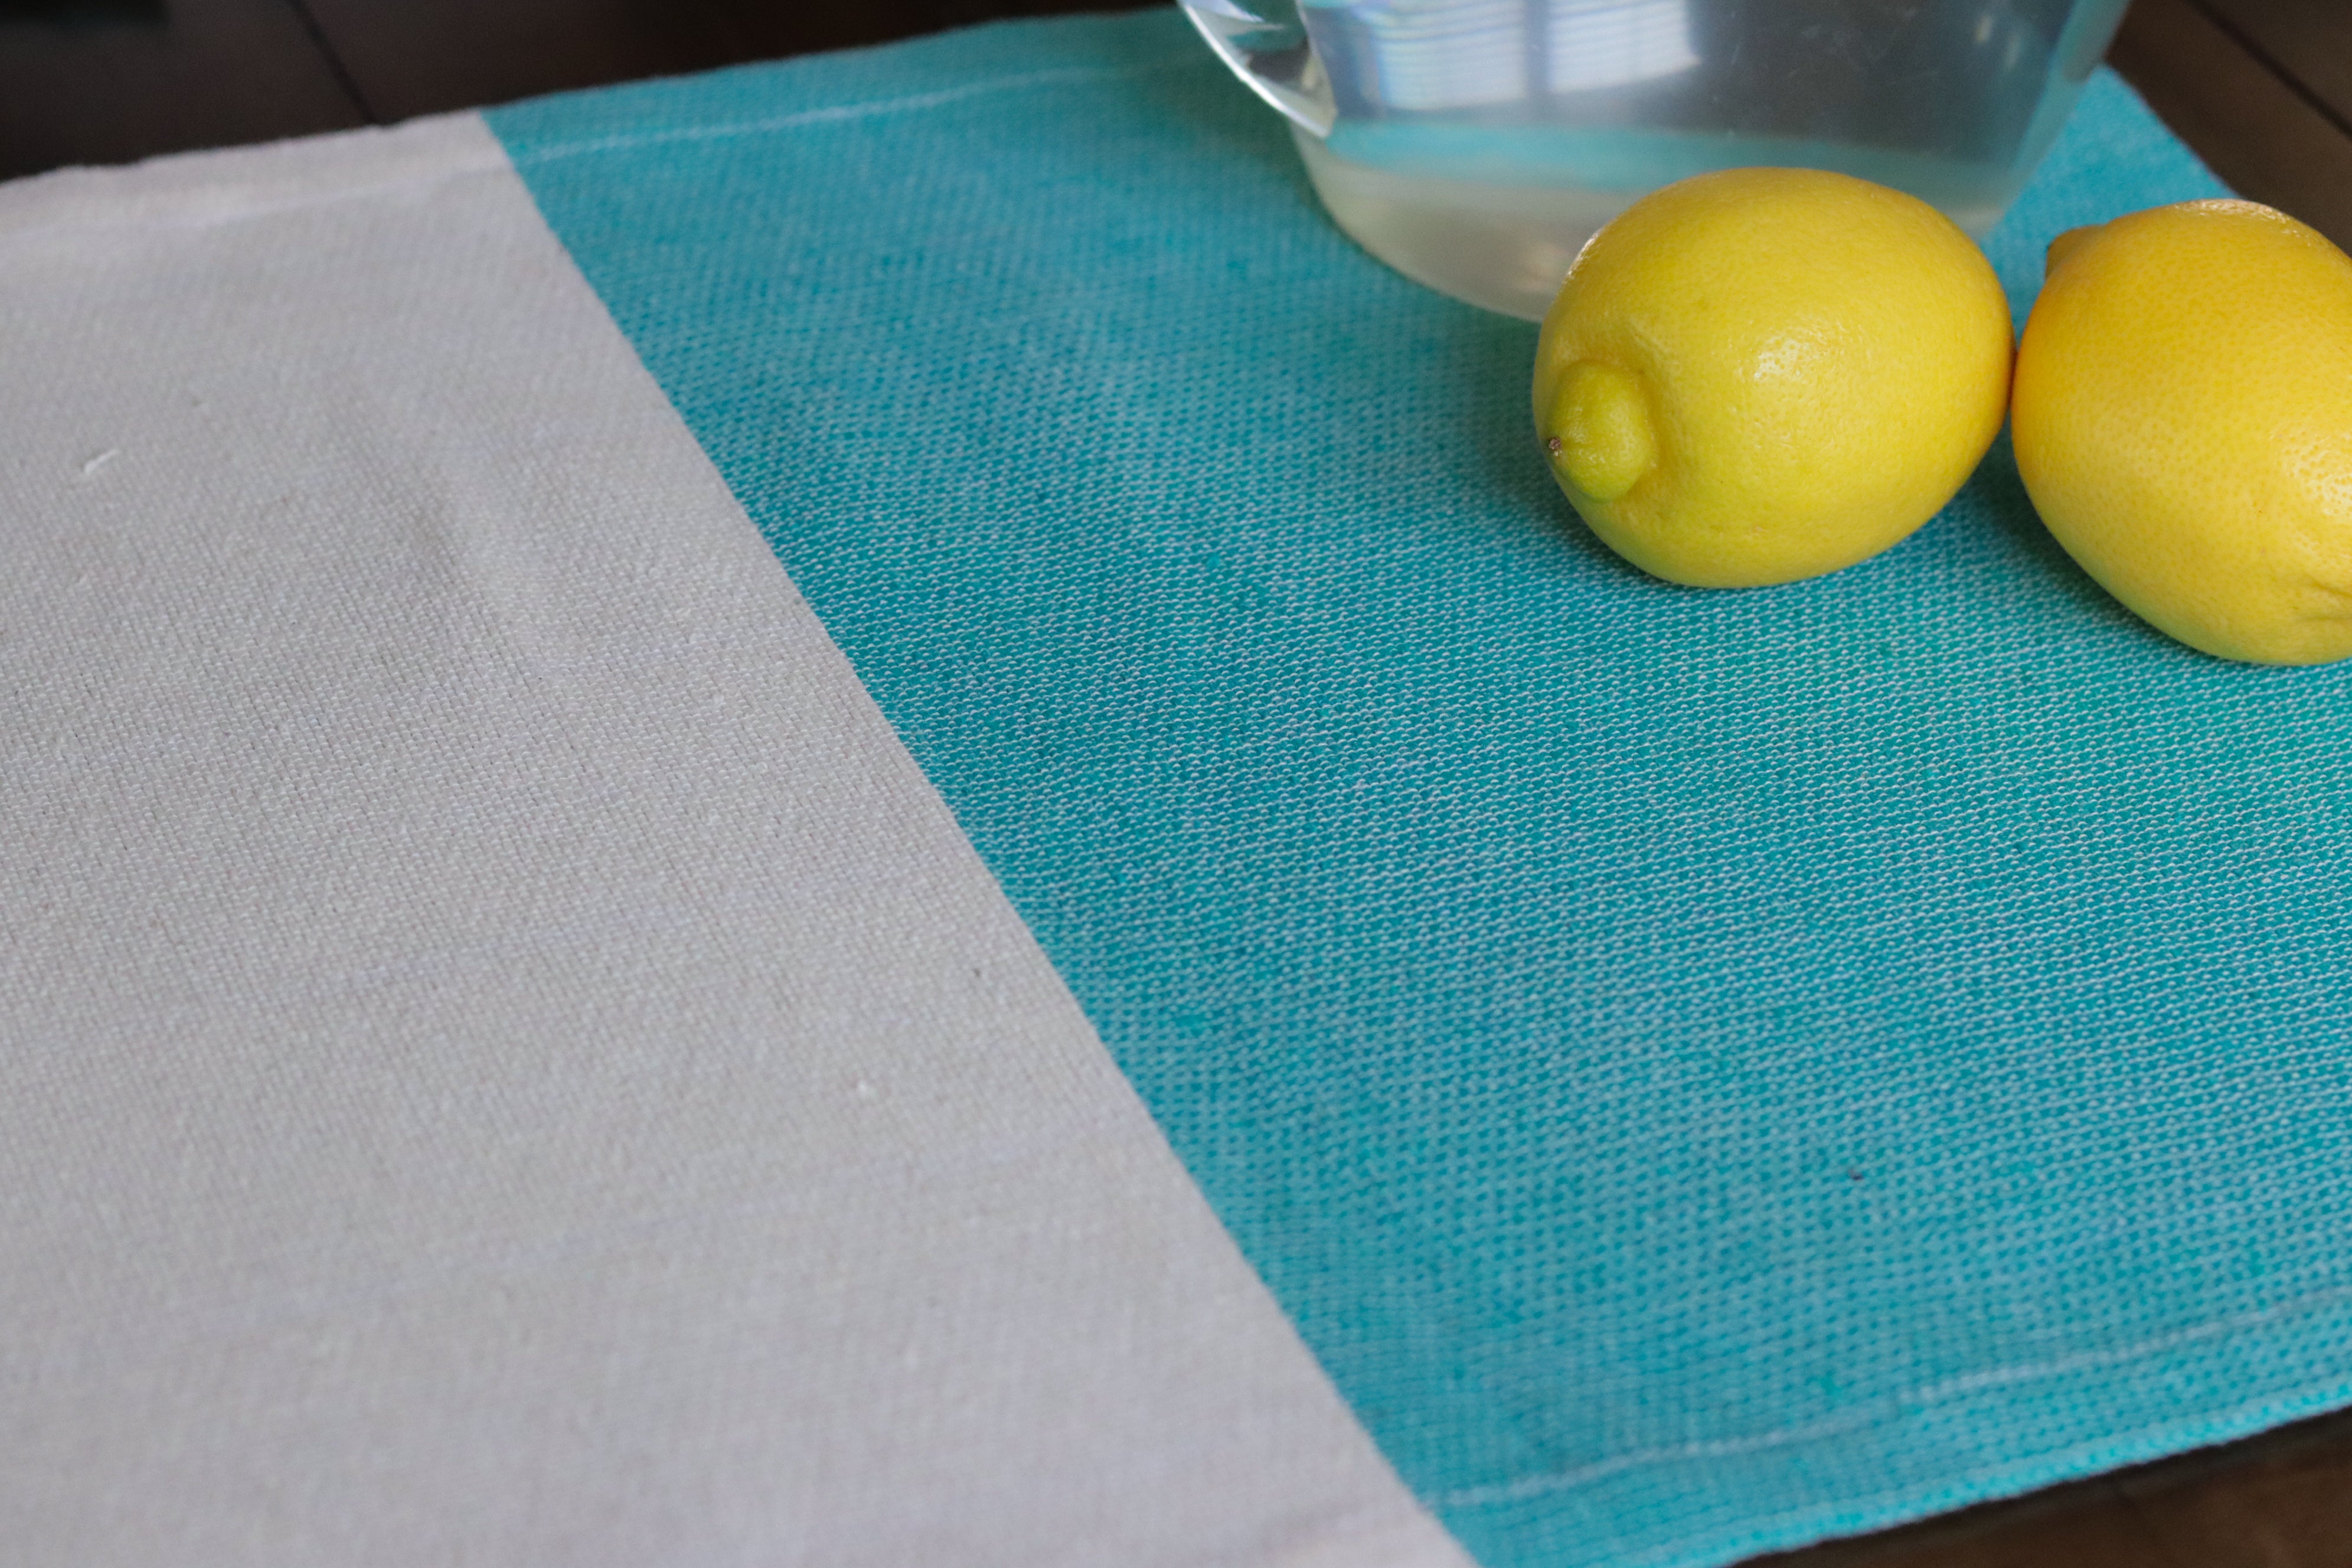 VOLVERde brings you sustainable table linens that celebrate culture and traditions. We curate eco-friendly, sustainable placemats and napkins. These sustainable handwoven placemats made with 100% sustainably sourced with Mexican cotton. Artisanal quality made to last in bright colors like Rosa Mexicano and teal. 